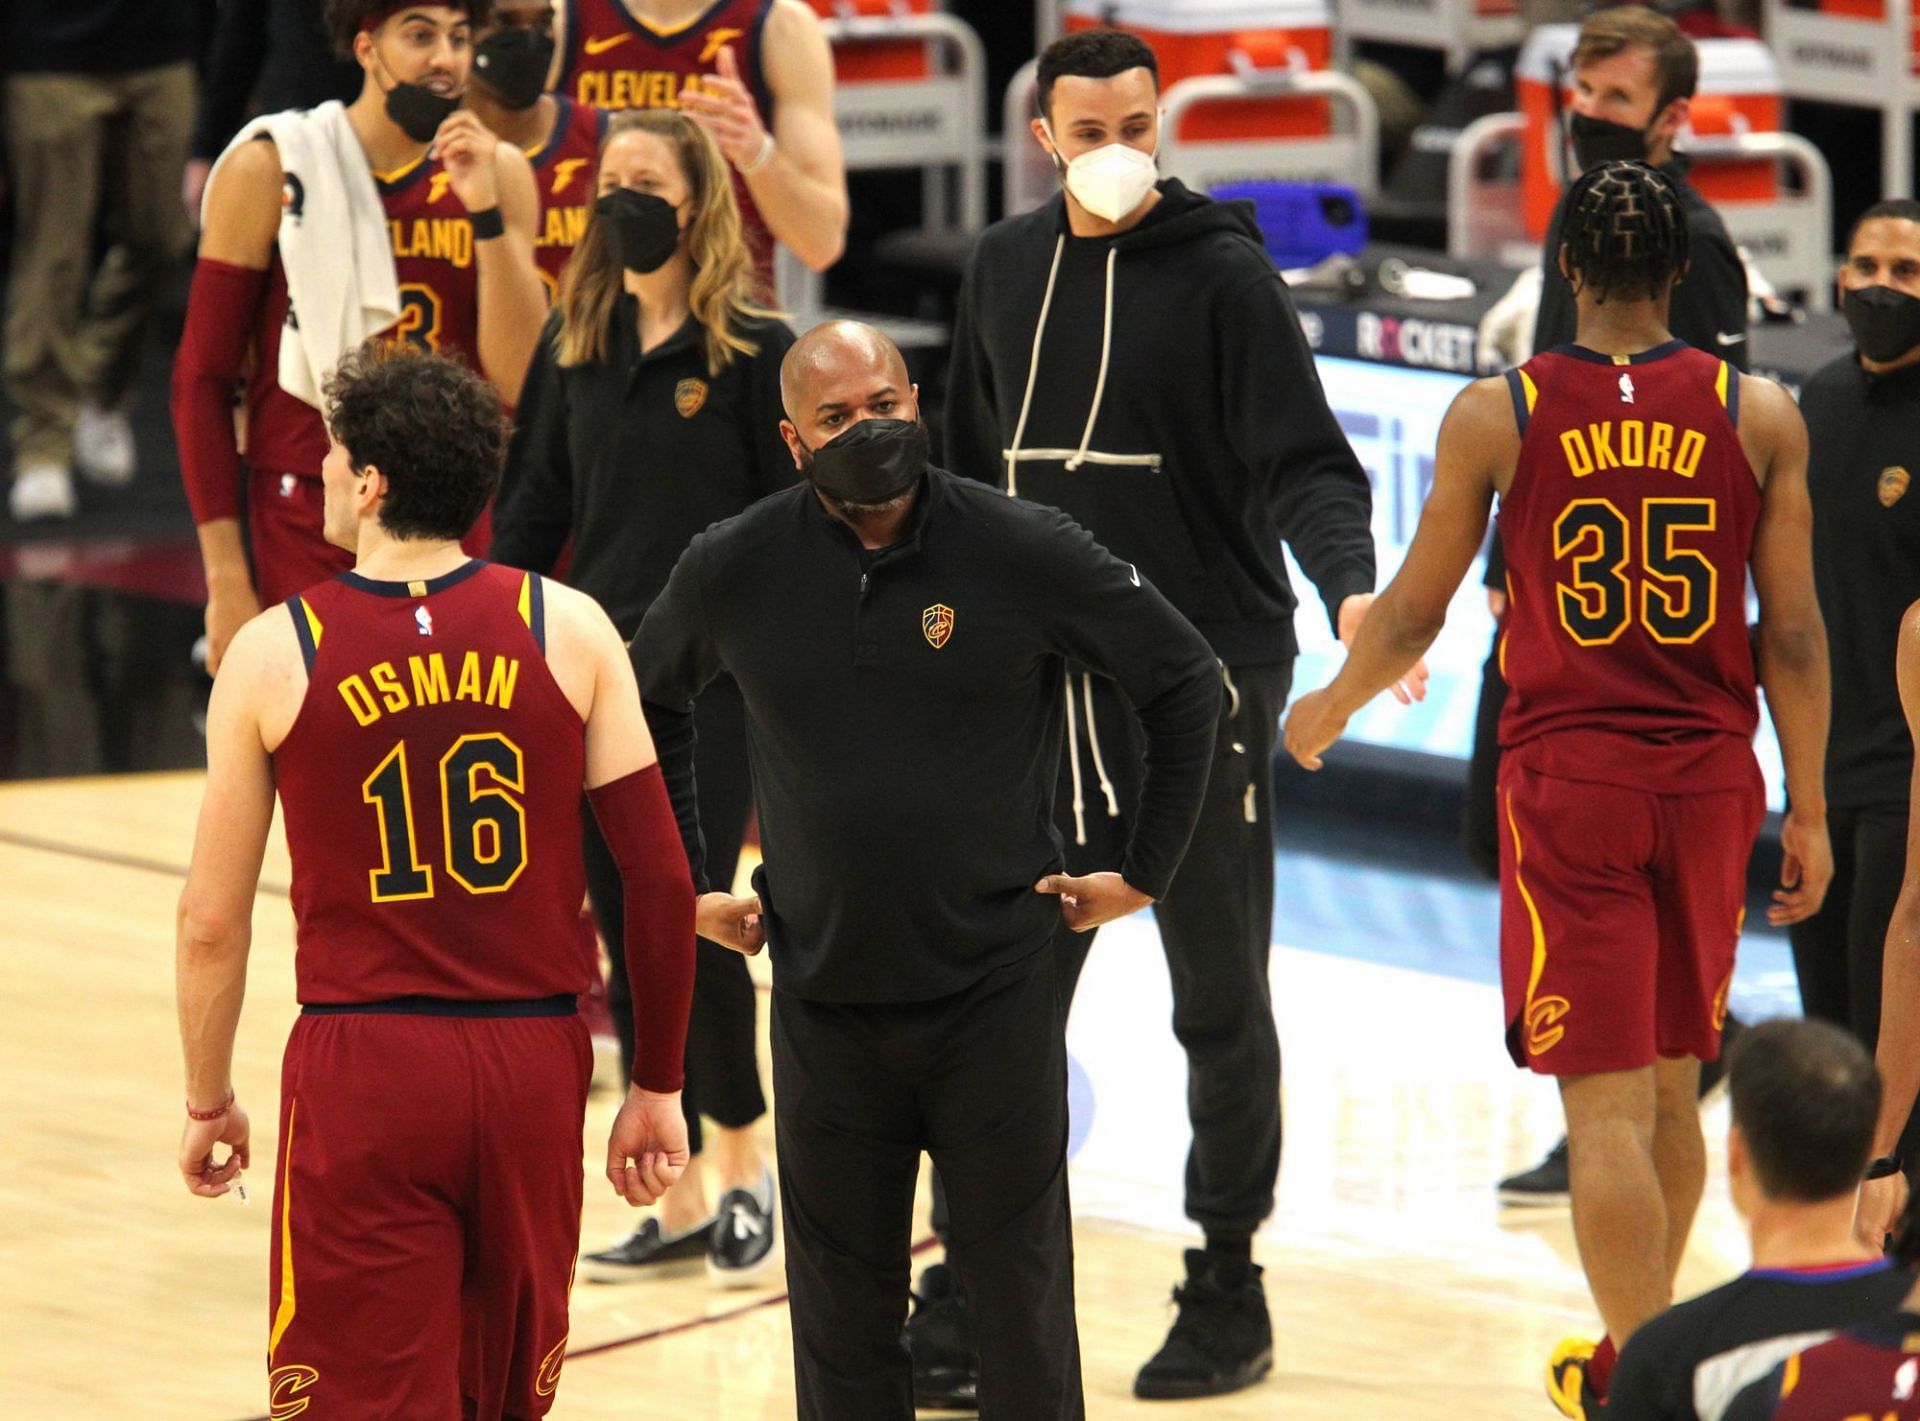 The Cleveland Cavaliers continue to defy expectations this season. [Photo: Cleveland.com]